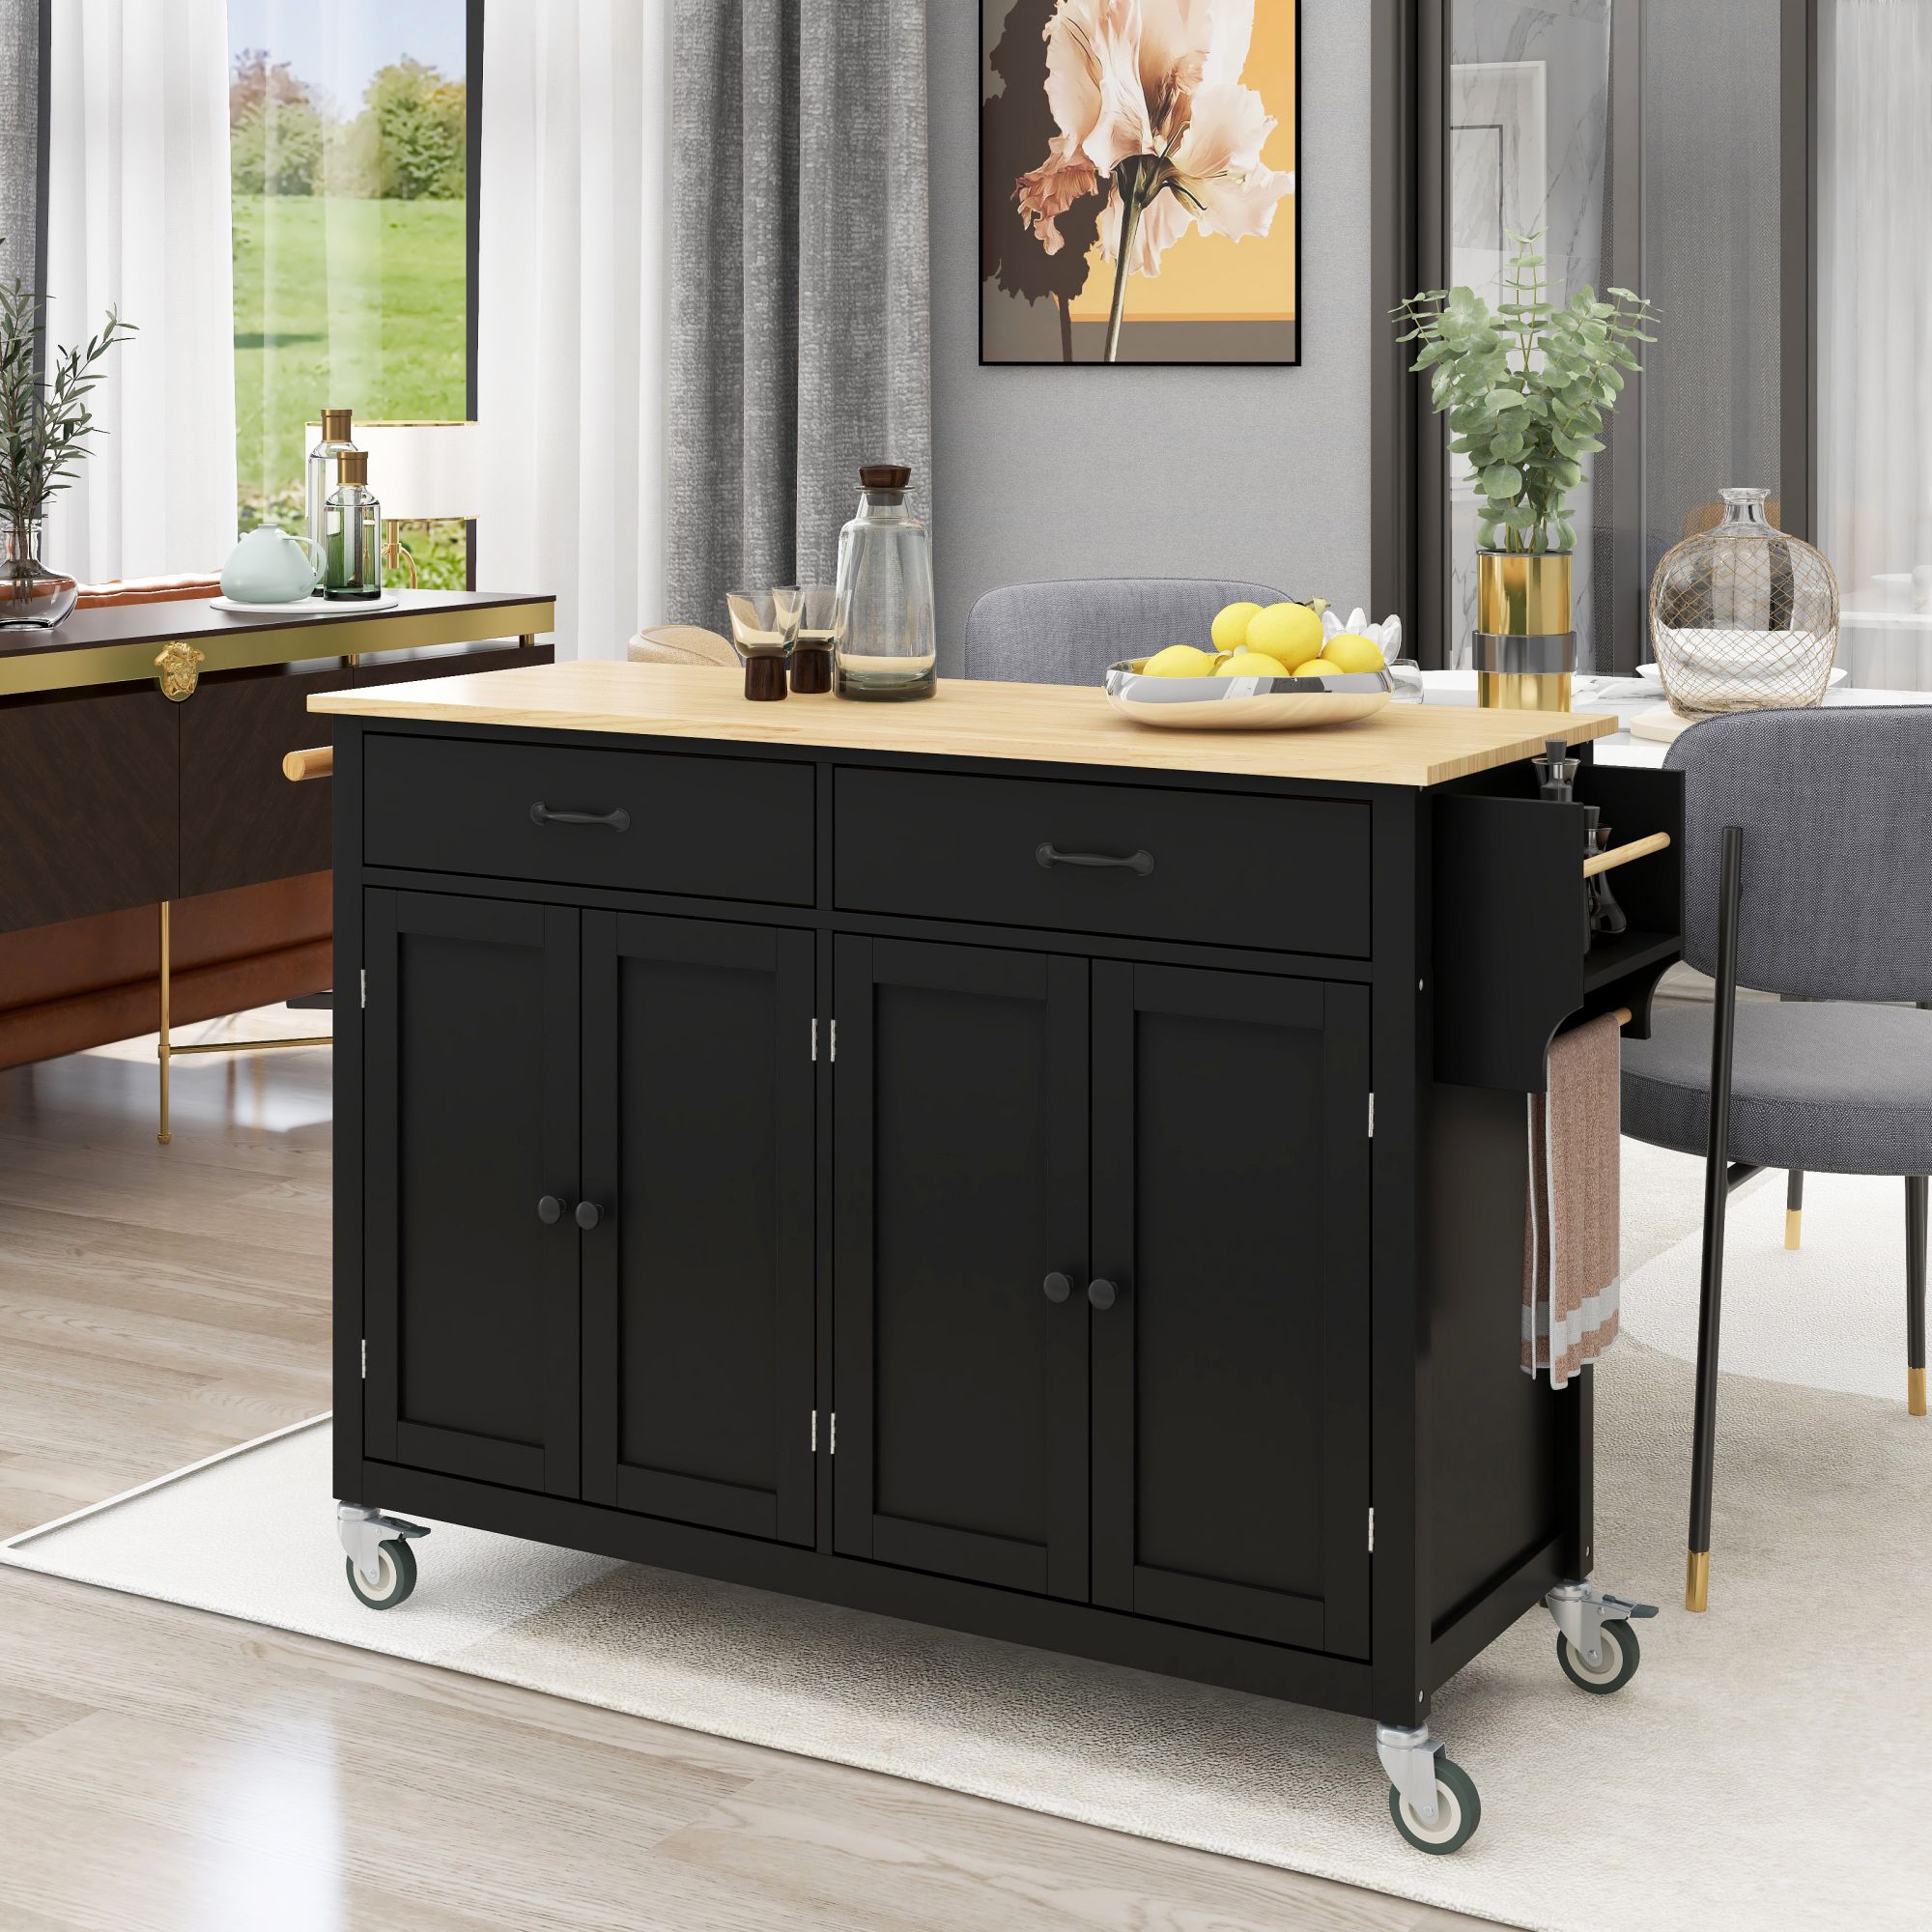 Kitchen Island Cart with Solid Wood Top and Locking Wheels，54.3 Inch Width，4 Door Cabinet and Two Drawers，Spice Rack, Towel Rack （Black）-Boyel Living